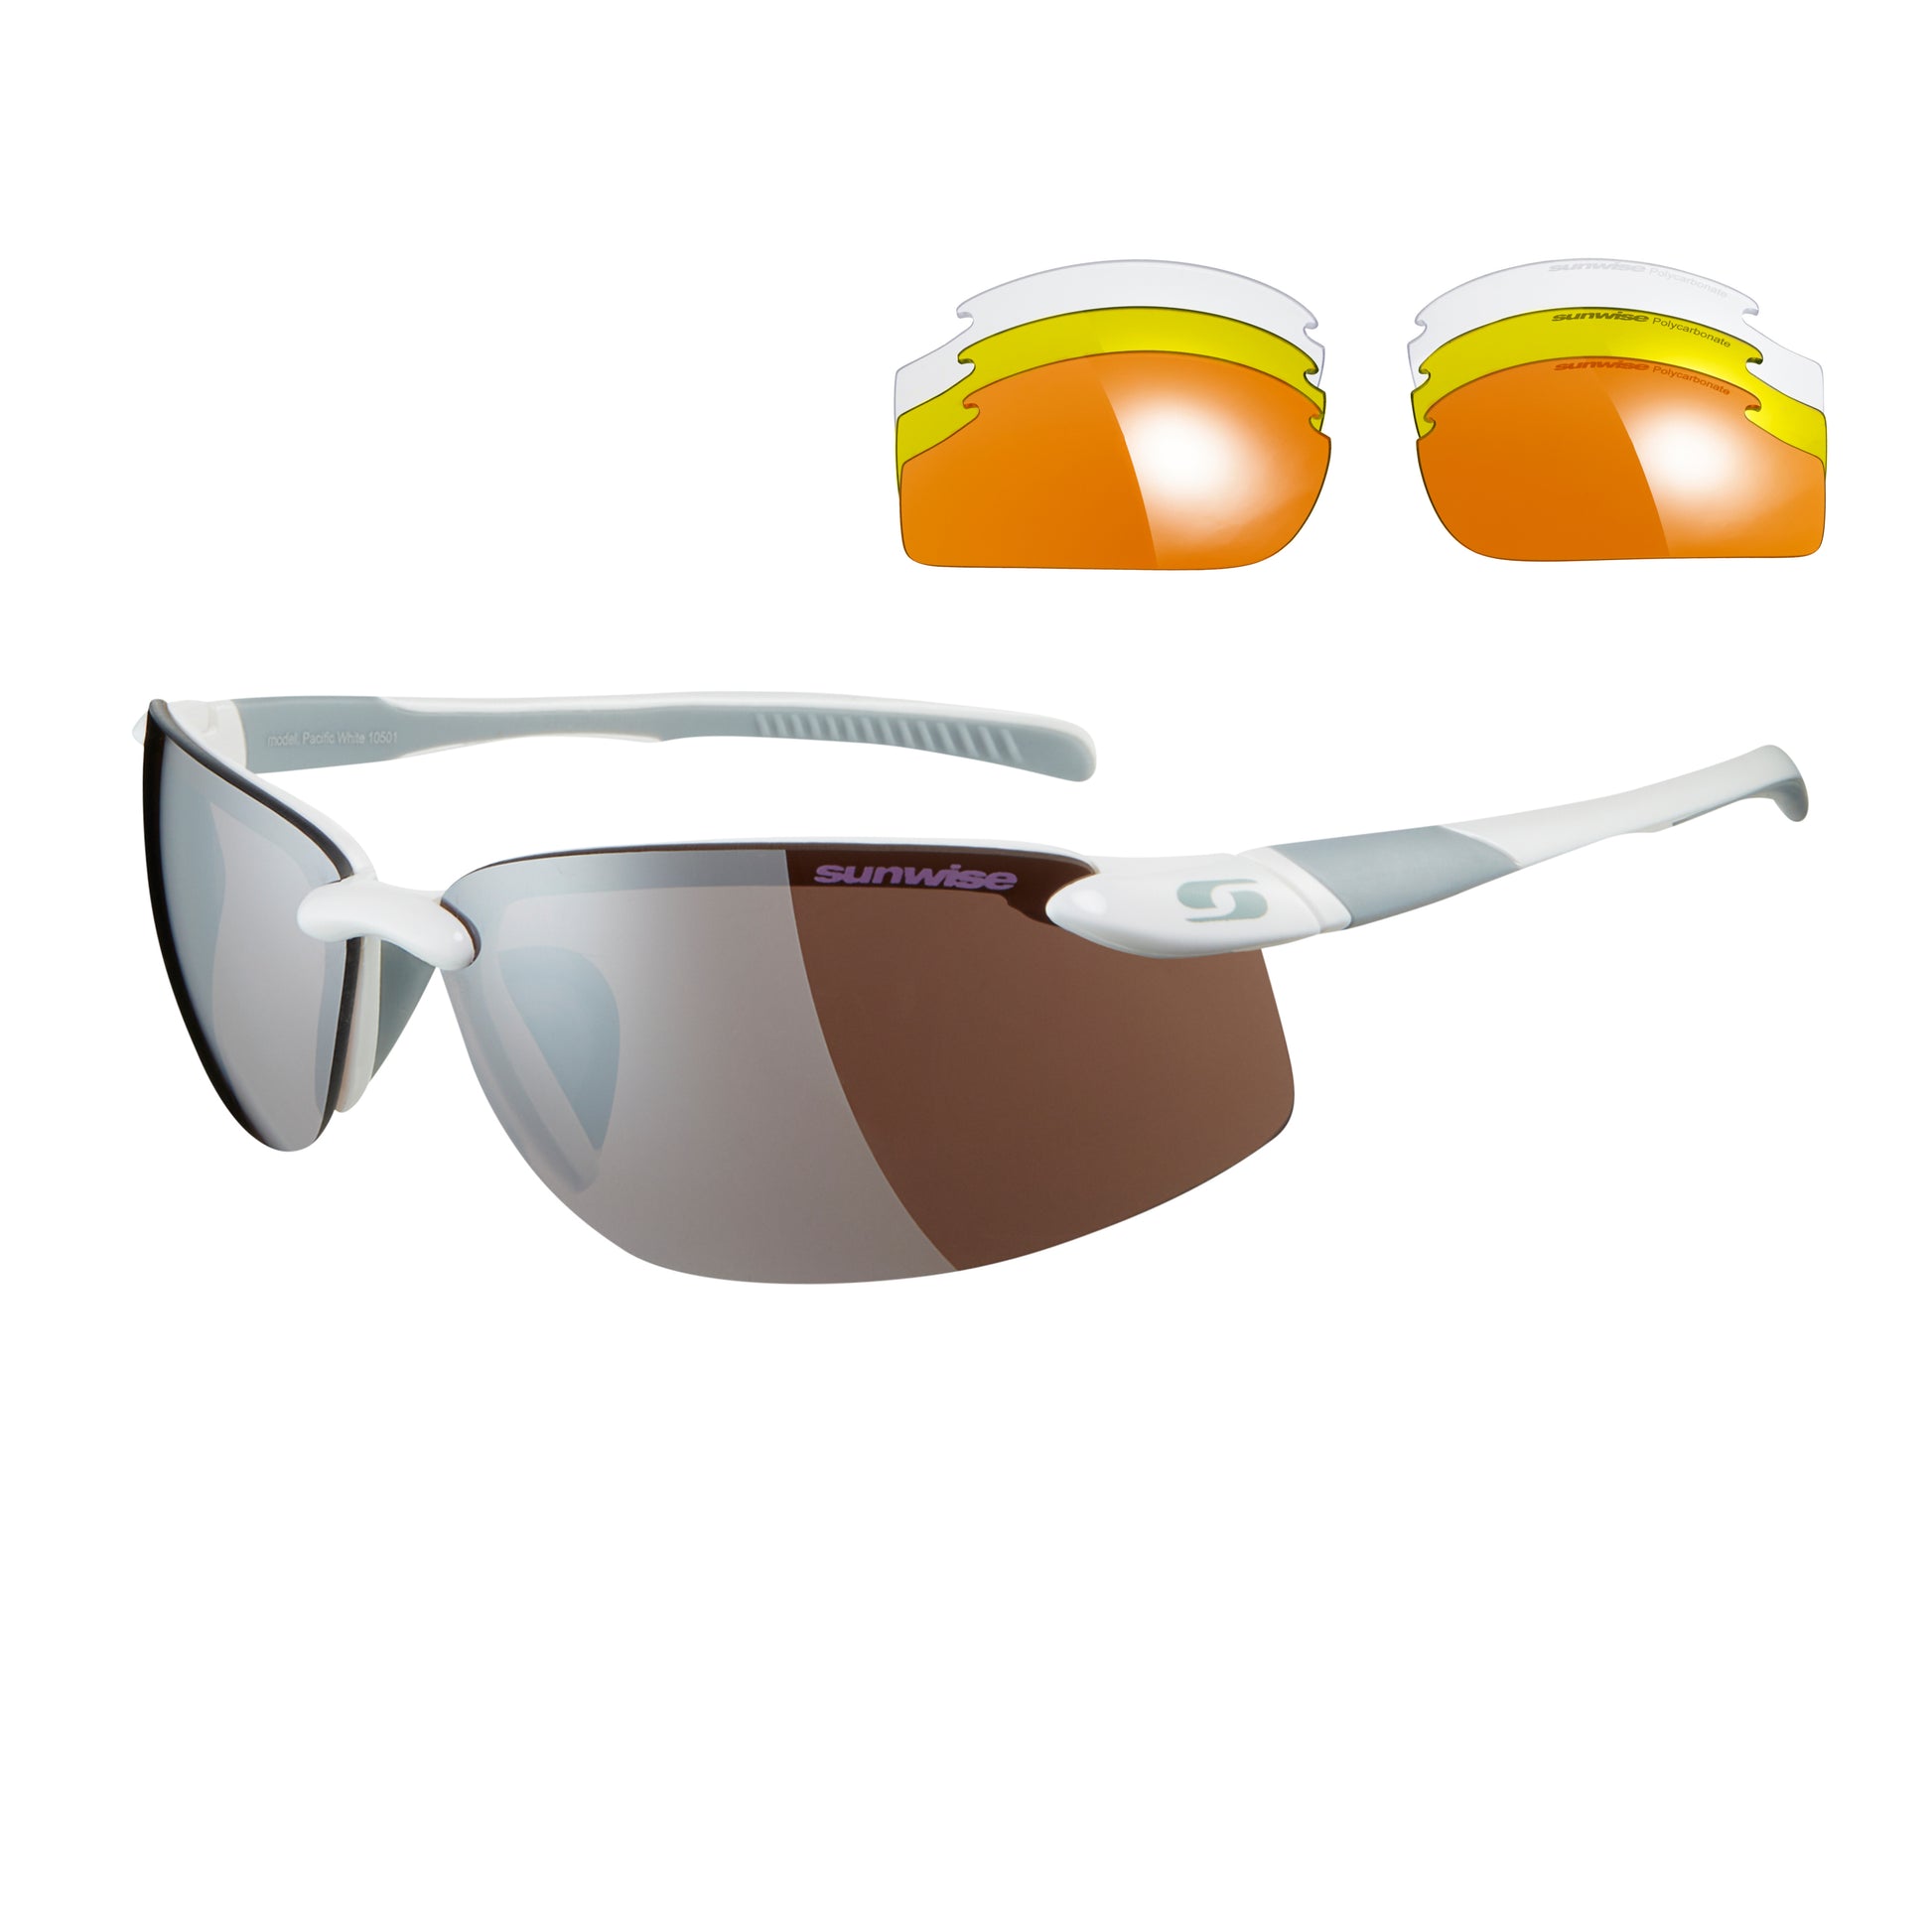 Sunwise Pacific sports sunglasses in white with interchangeable lenses